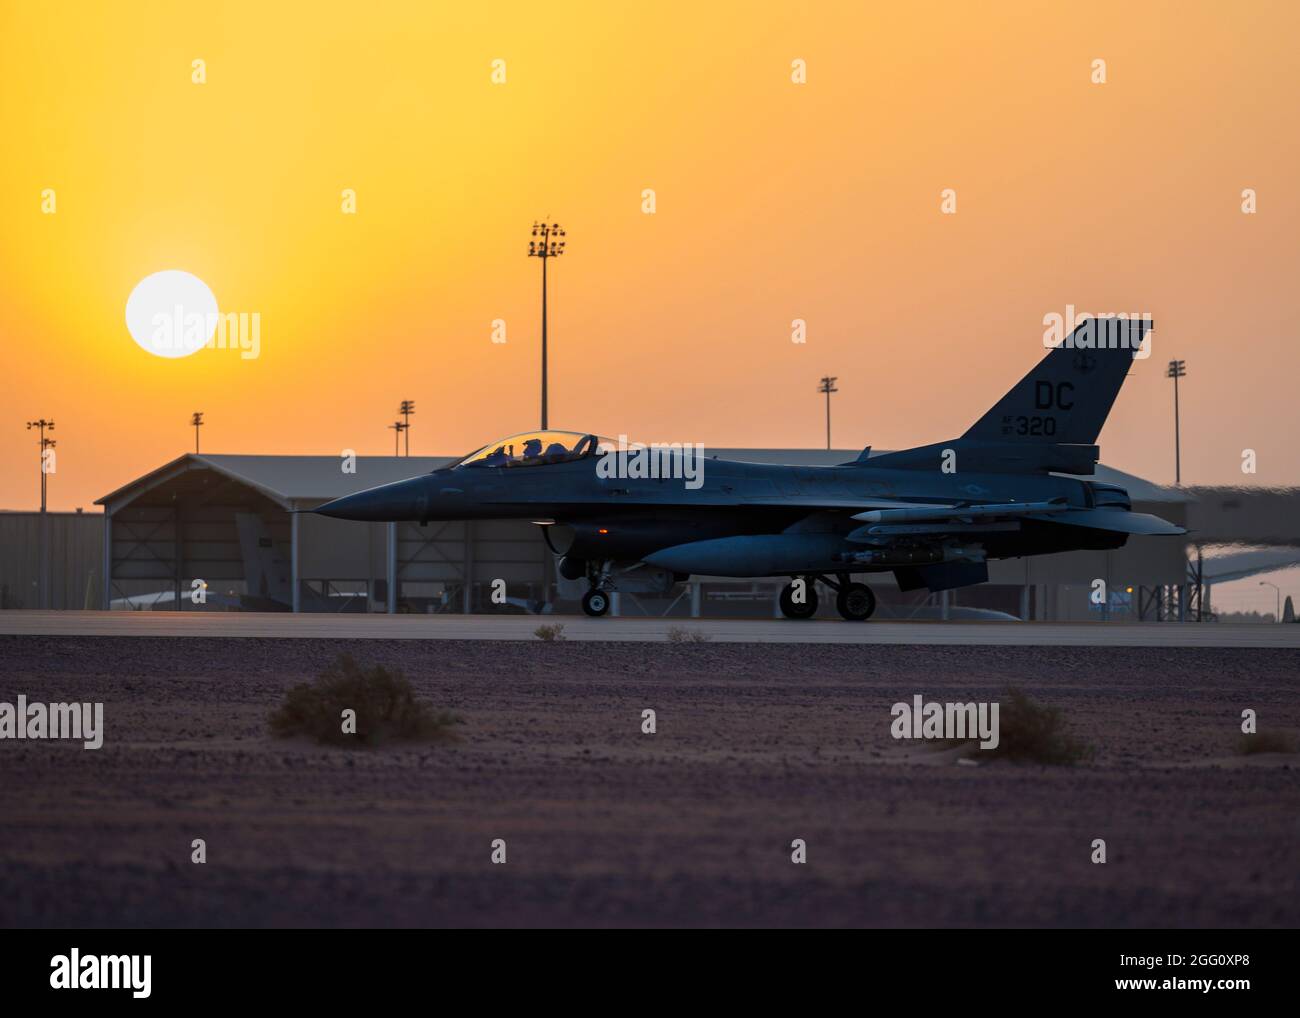 A U.S Air Force F-16 Fighting Falcon taxis to the runway at Prince Sultan Air Base, Kingdom of Saudi Arabia, in preparation for a combat air patrol sortie in the U.S. Central Command area of responsibility. The 378th Air Expeditionary Wing is providing air support, logistical capabilities, manpower and resources to U.S. Air Force Central in support of non-combatant evacuation operations currently occurring. (U.S. Air Force photo by Senior Airman Samuel Earick) Stock Photo